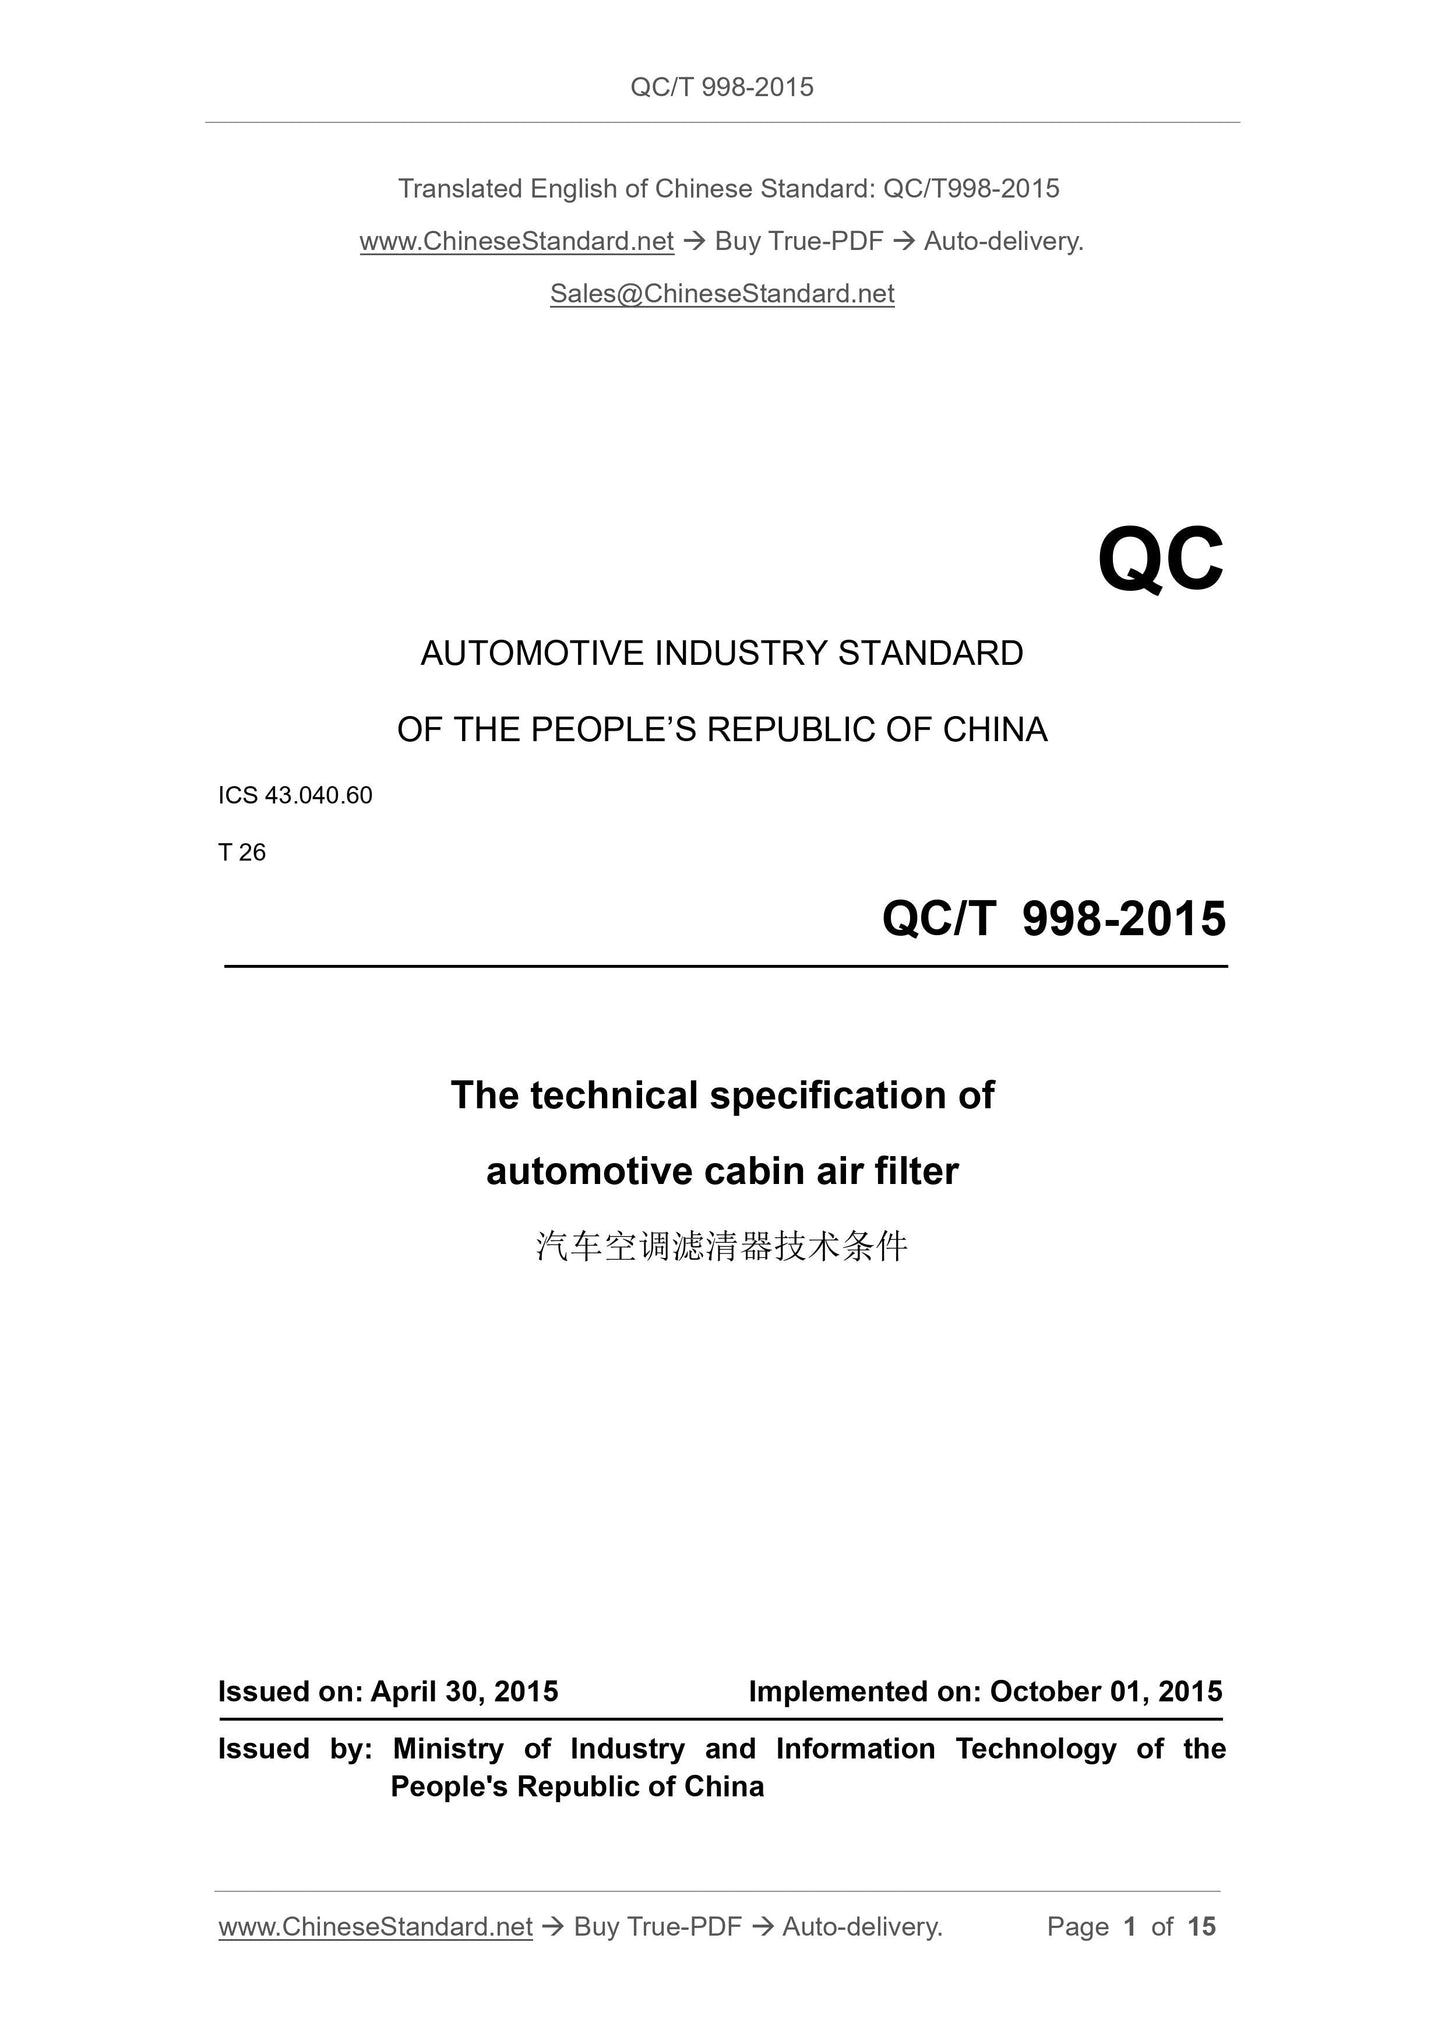 QC/T 998-2015 Page 1